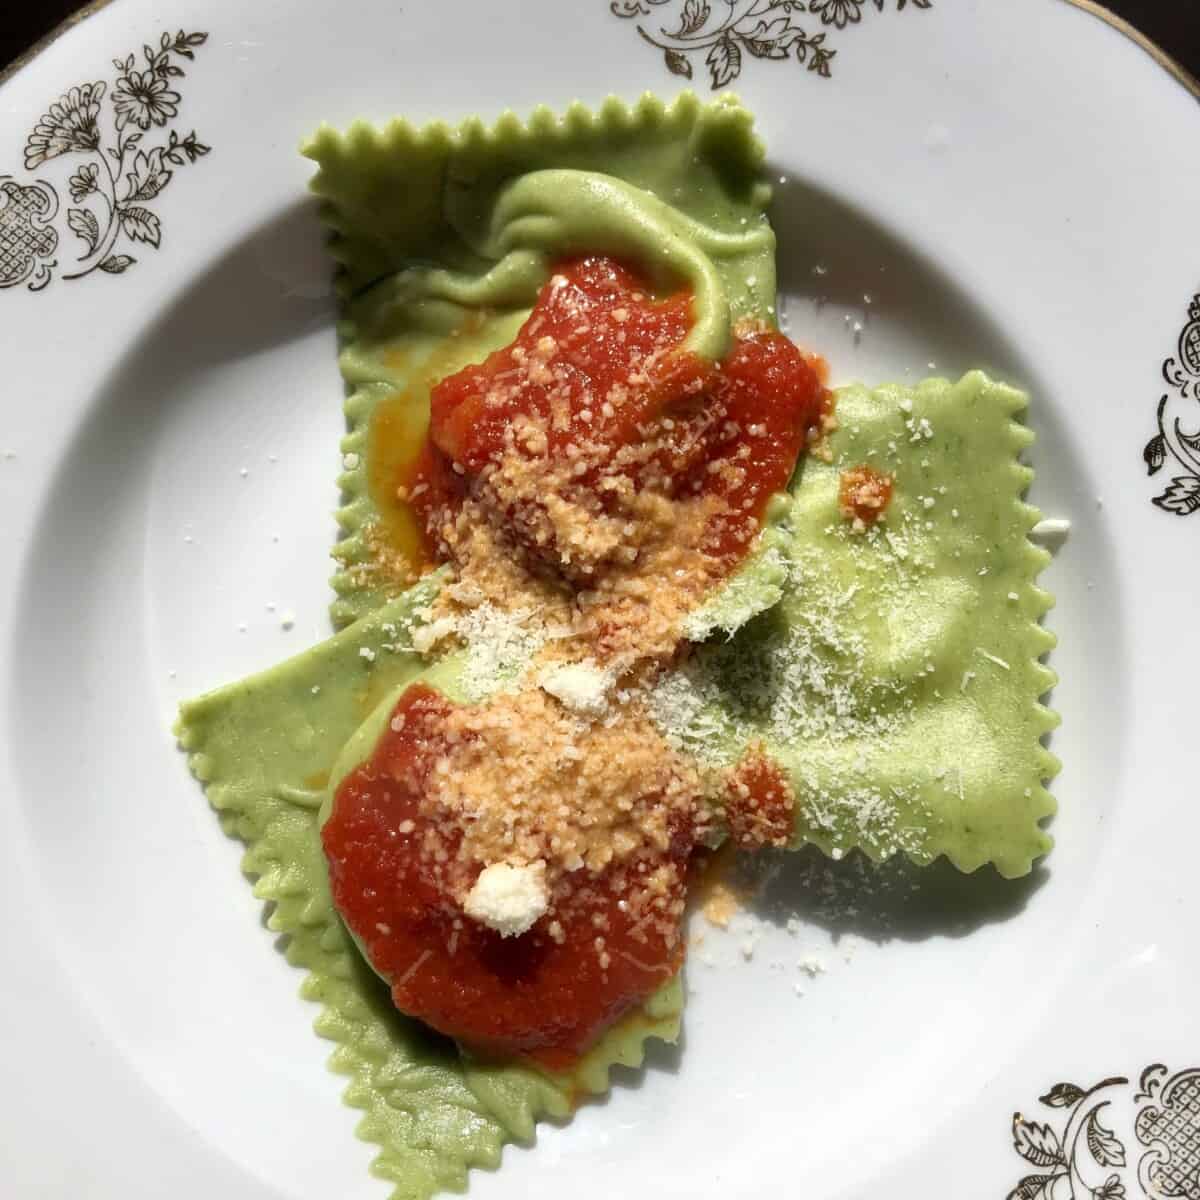 Homemade Ricotta and Parmigiano filled spinach ravioli